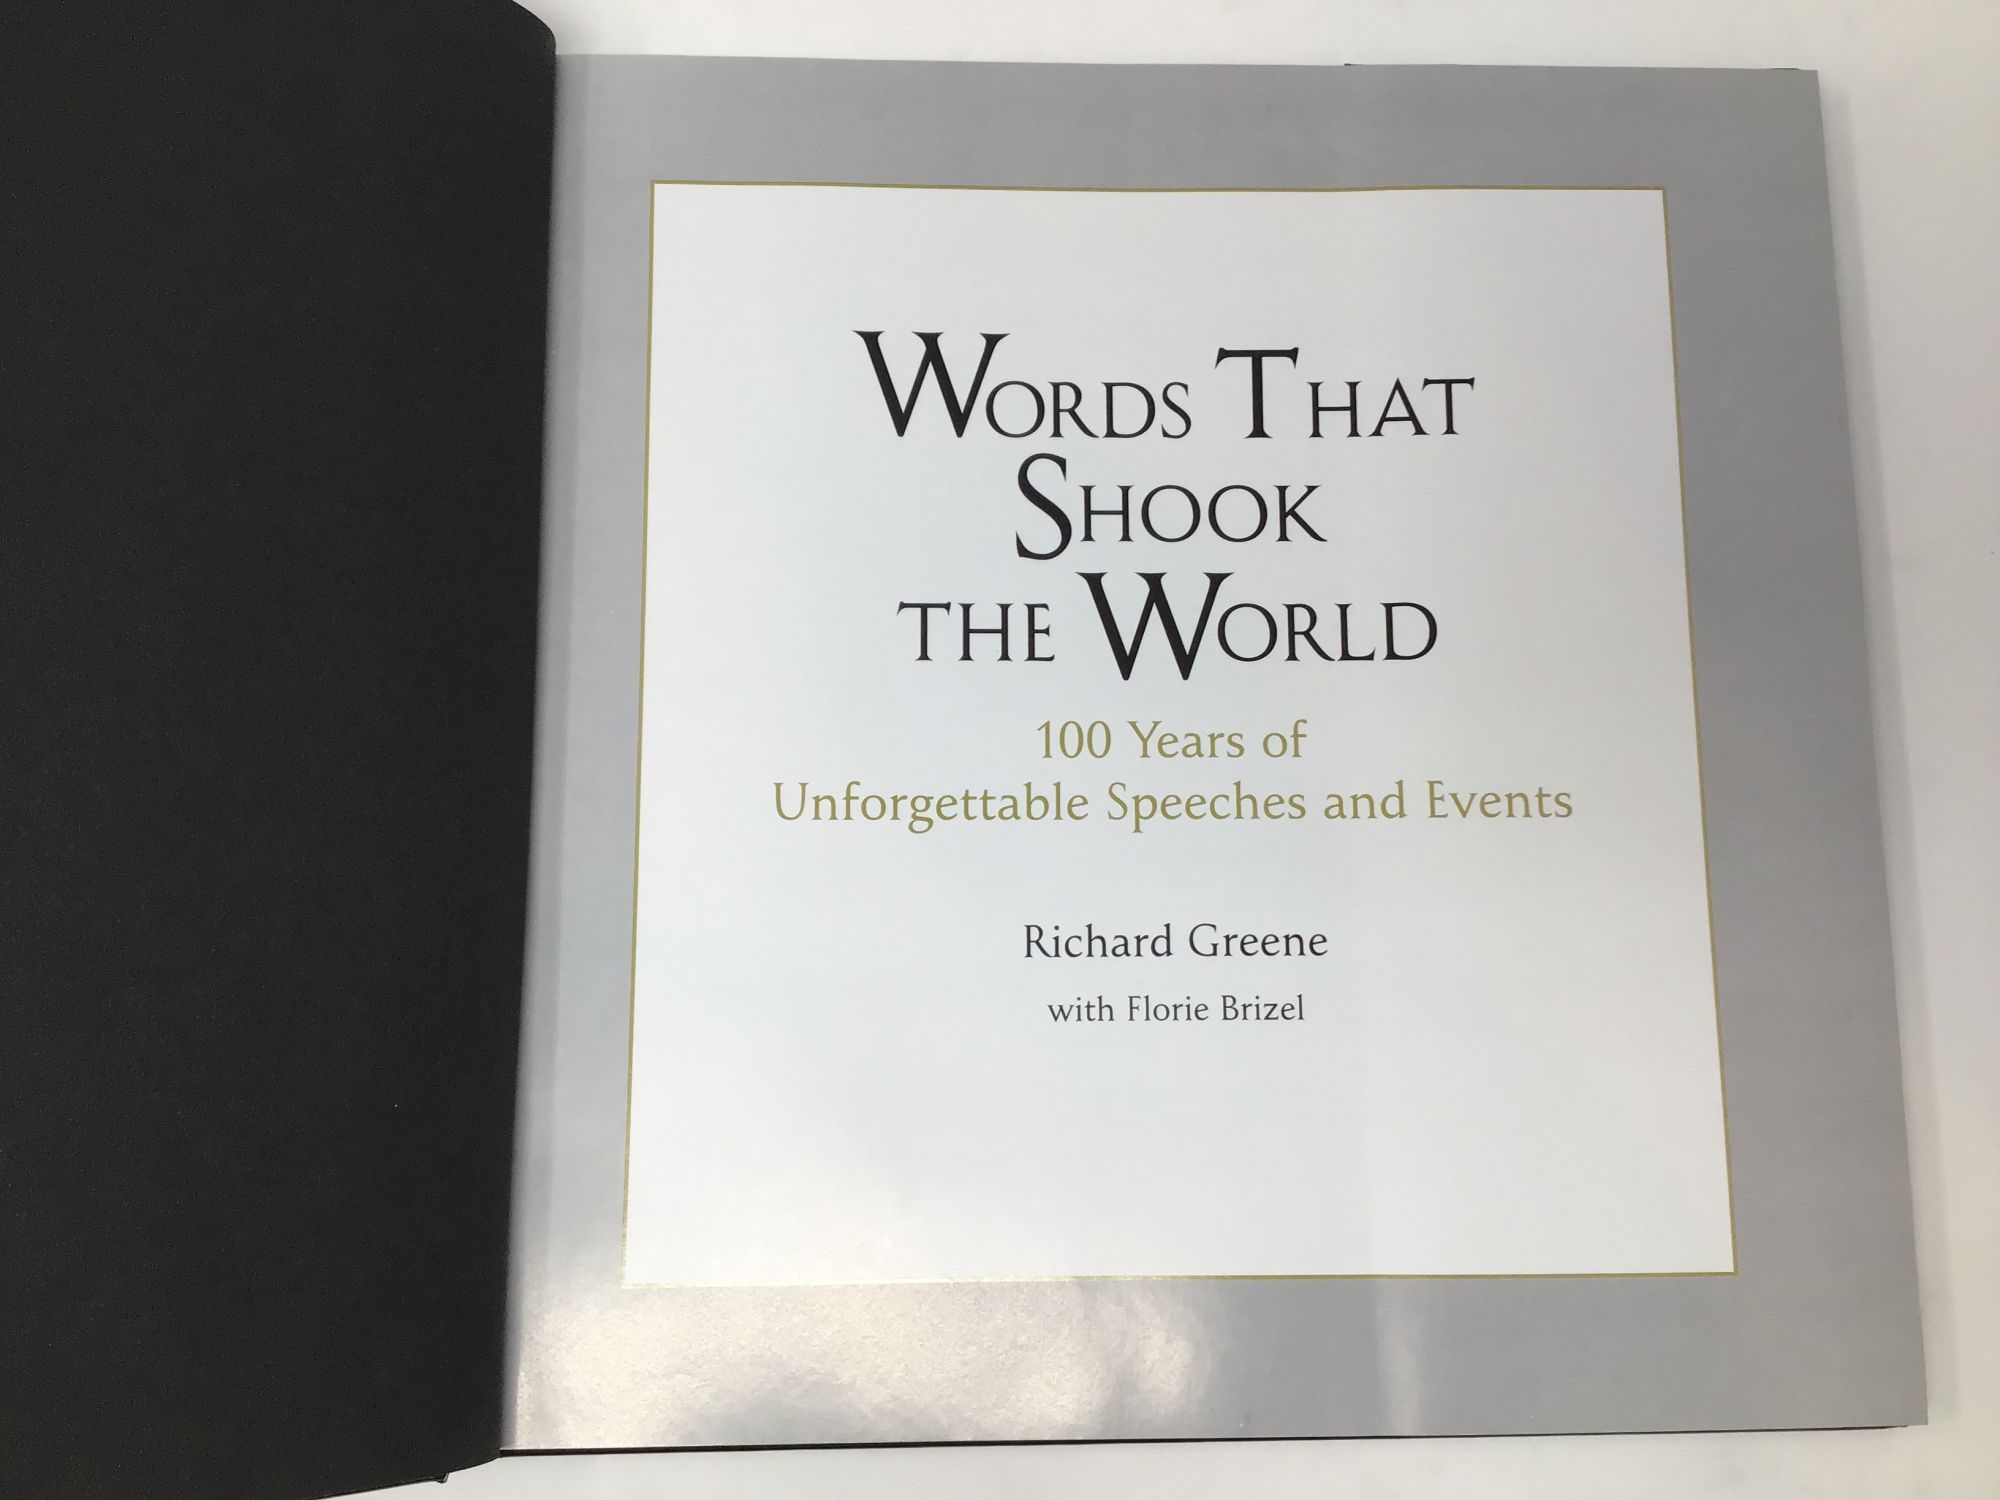 100 Years That Shook the World [DVD]